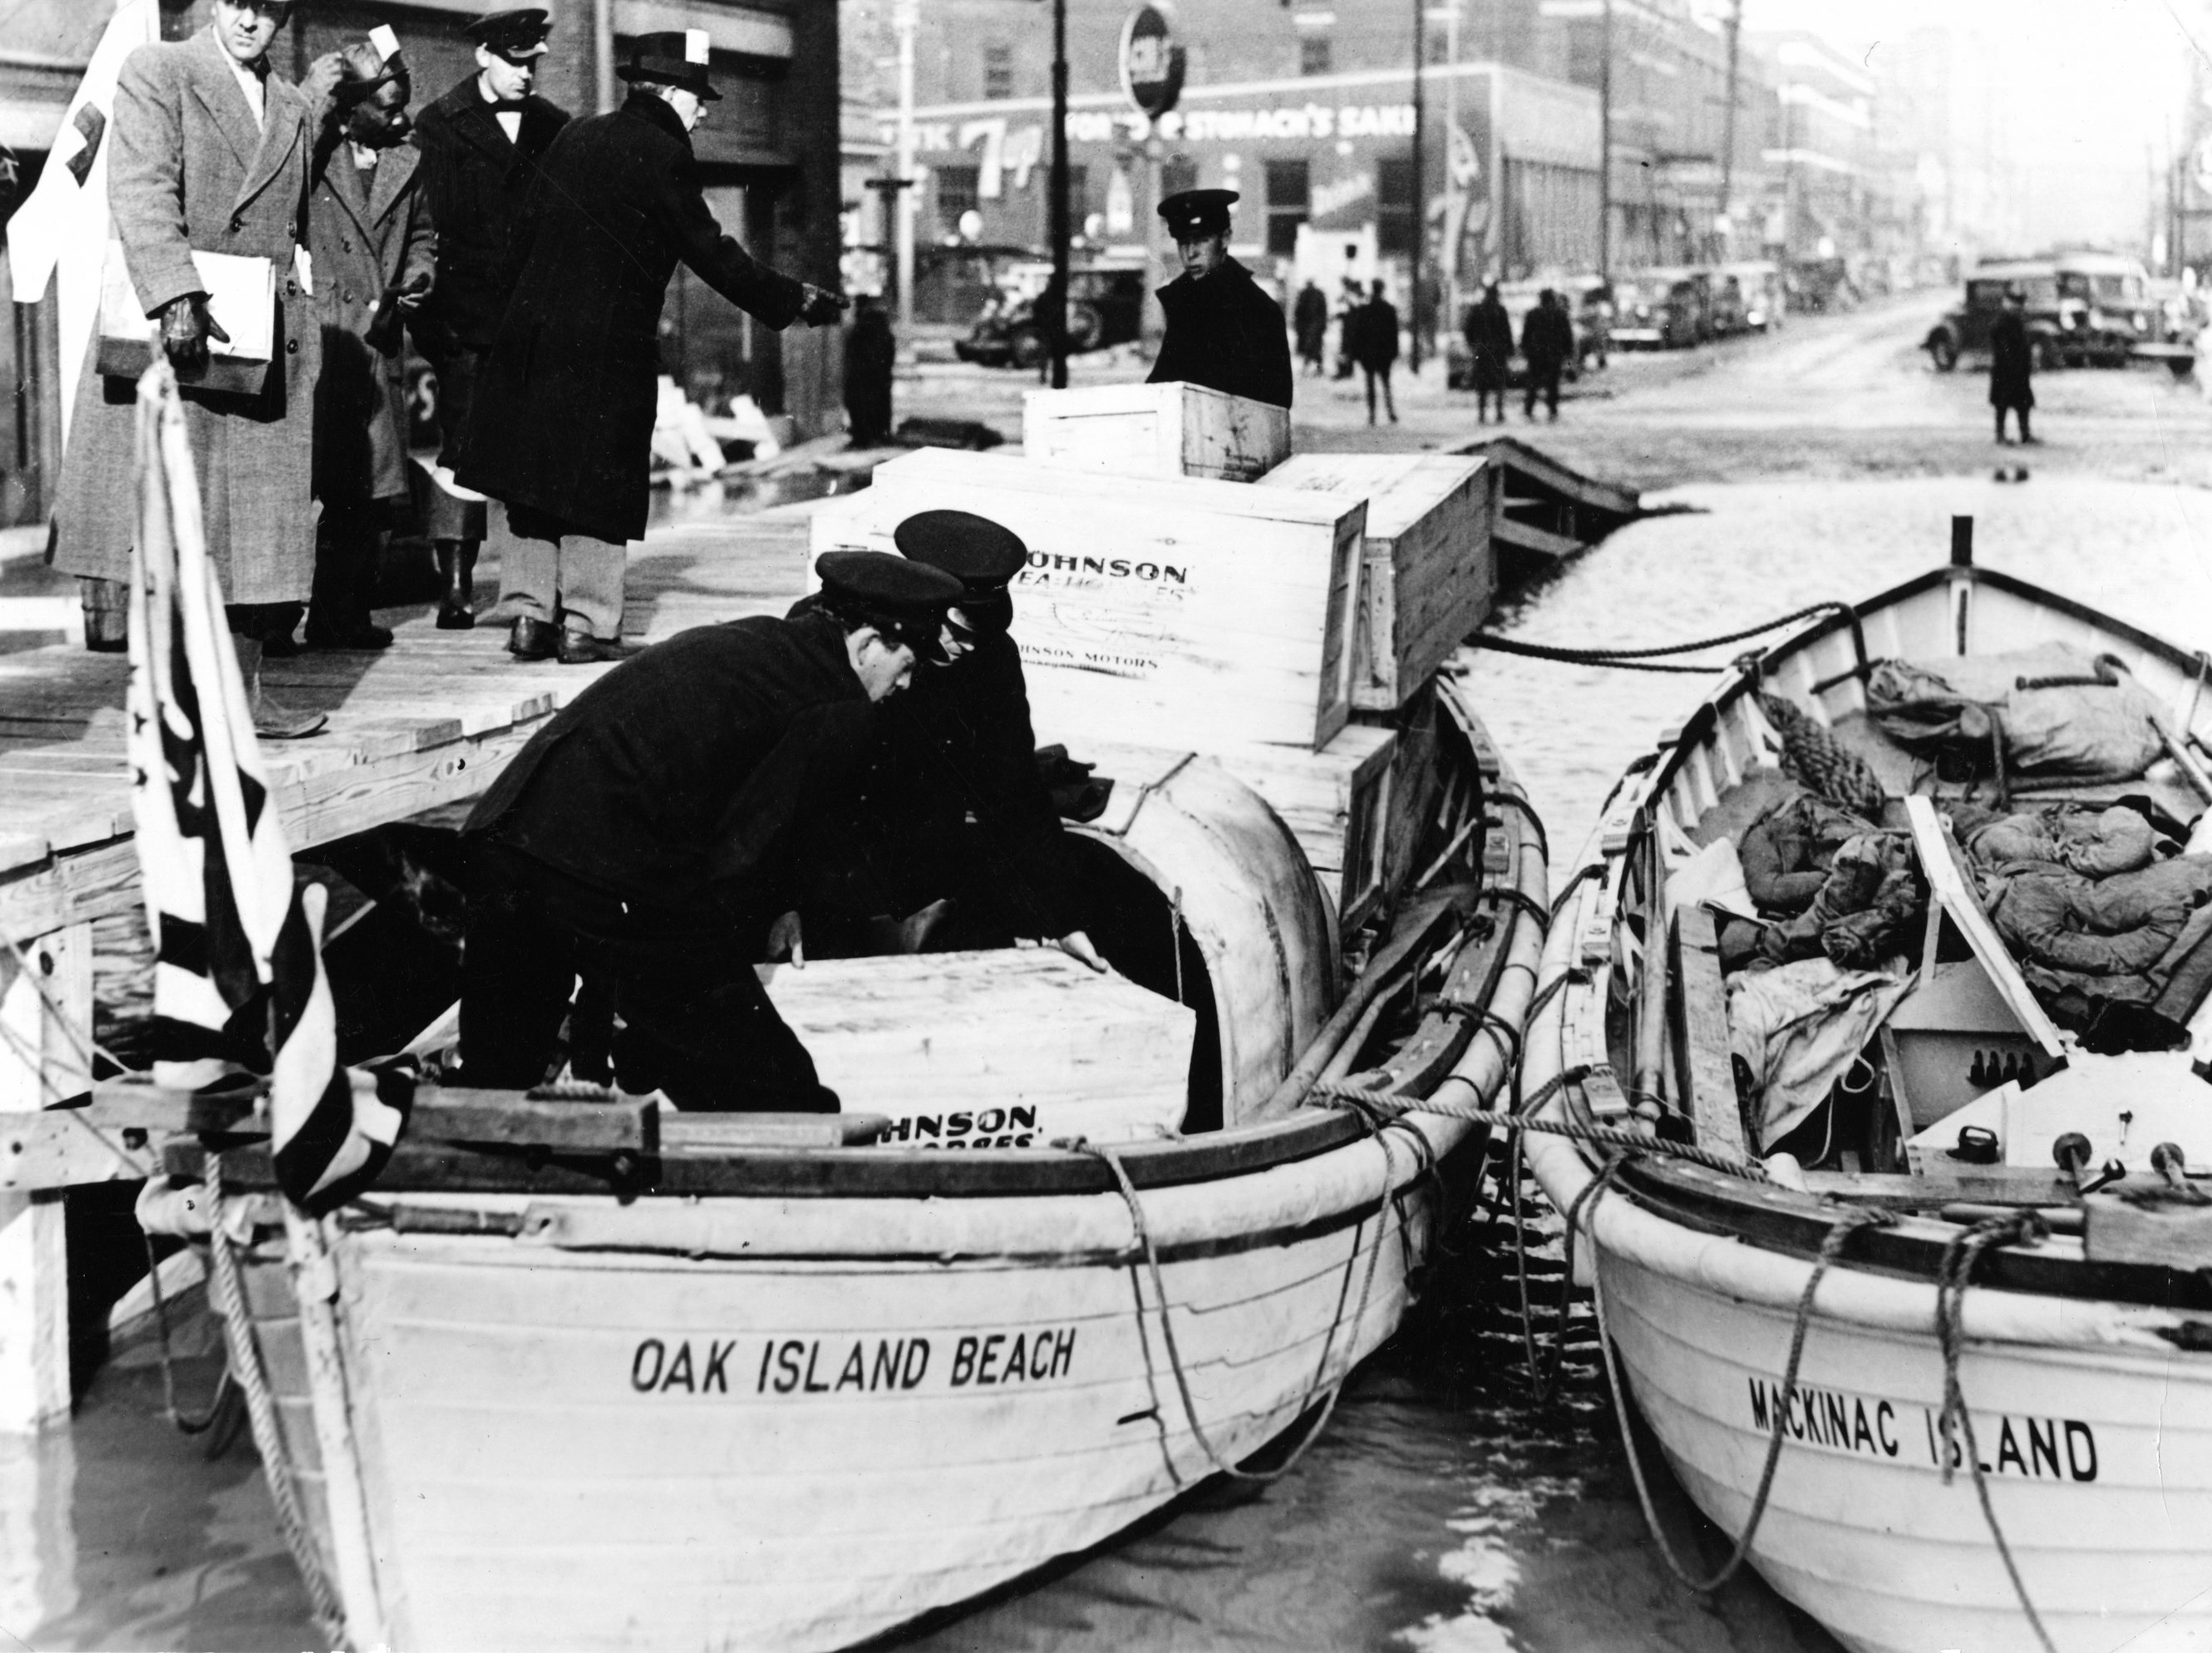 For the Ohio River flood relief effort, the Coast Guard mobilized units from the entire eastern U.S., including motor lifeboats from Oak Island Beach, New York, and Mackinac Island, Michigan, shown here assisting in Evansville, Indiana. (U.S. Coast Guard)